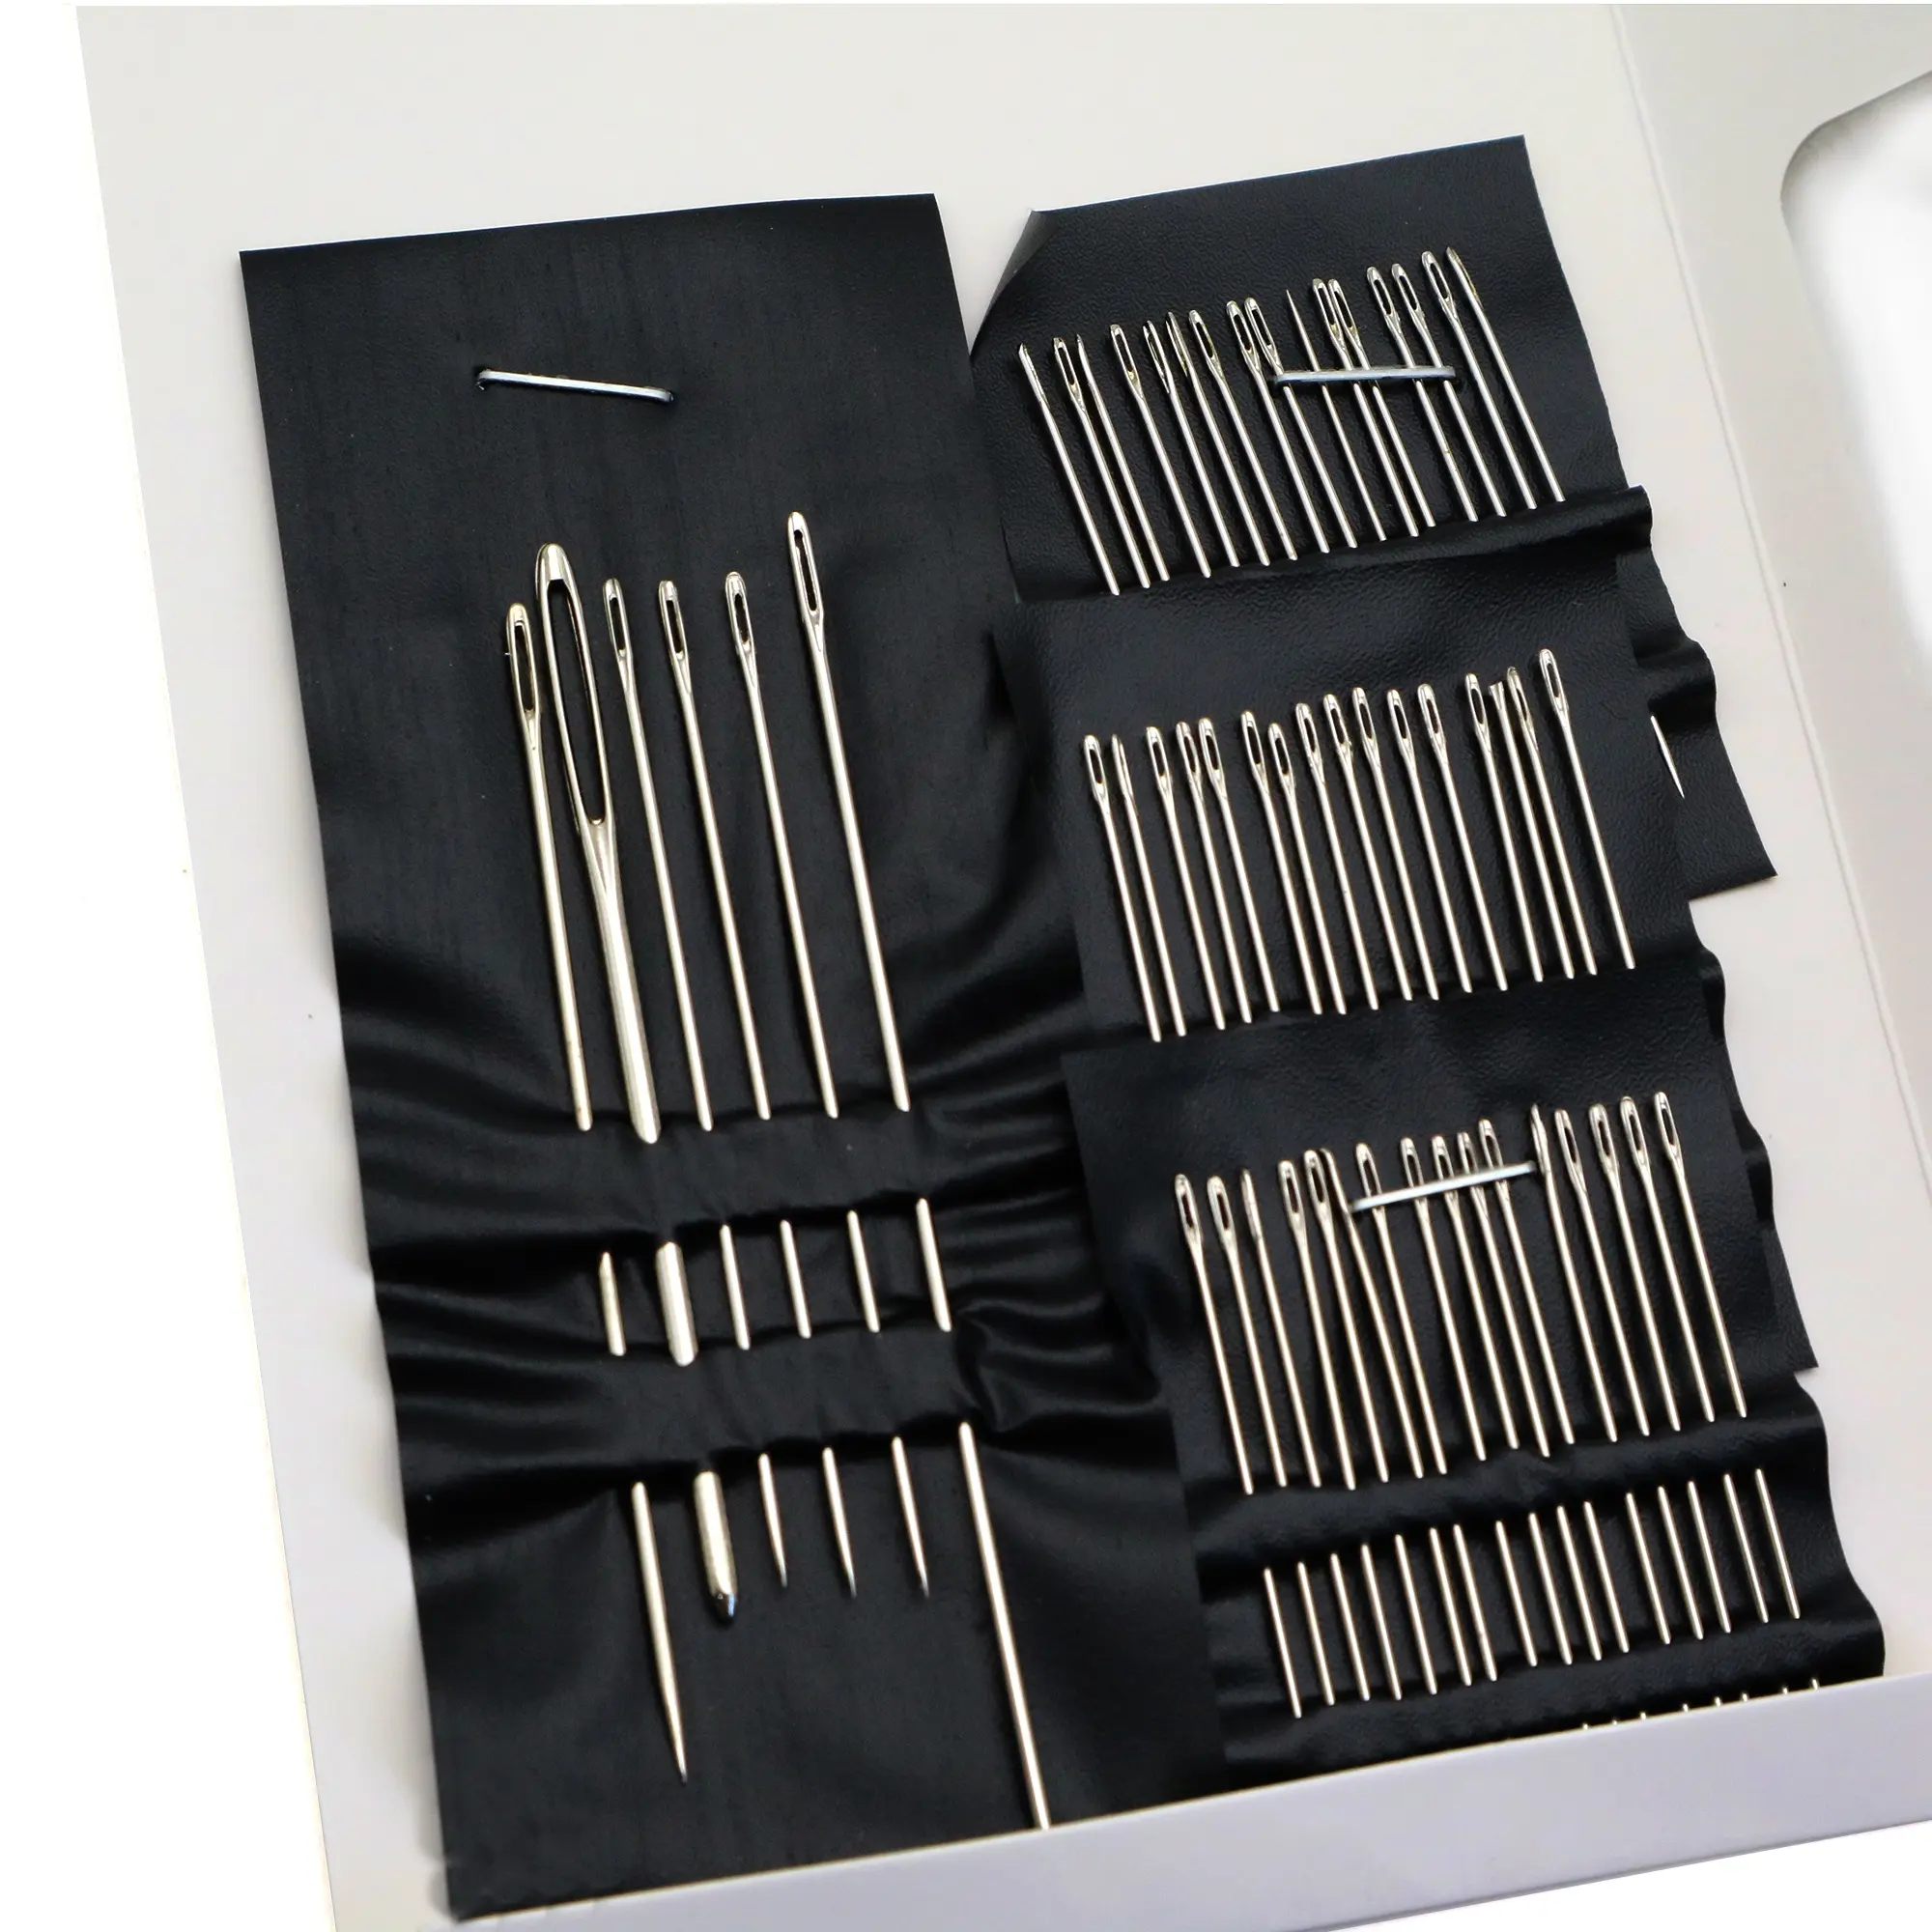 55pcs/set House Hand Apparel Sewing Needles Set Cross Embroidery Stitch Sewing Needle Kit for Crafts Diy Dolls 38180